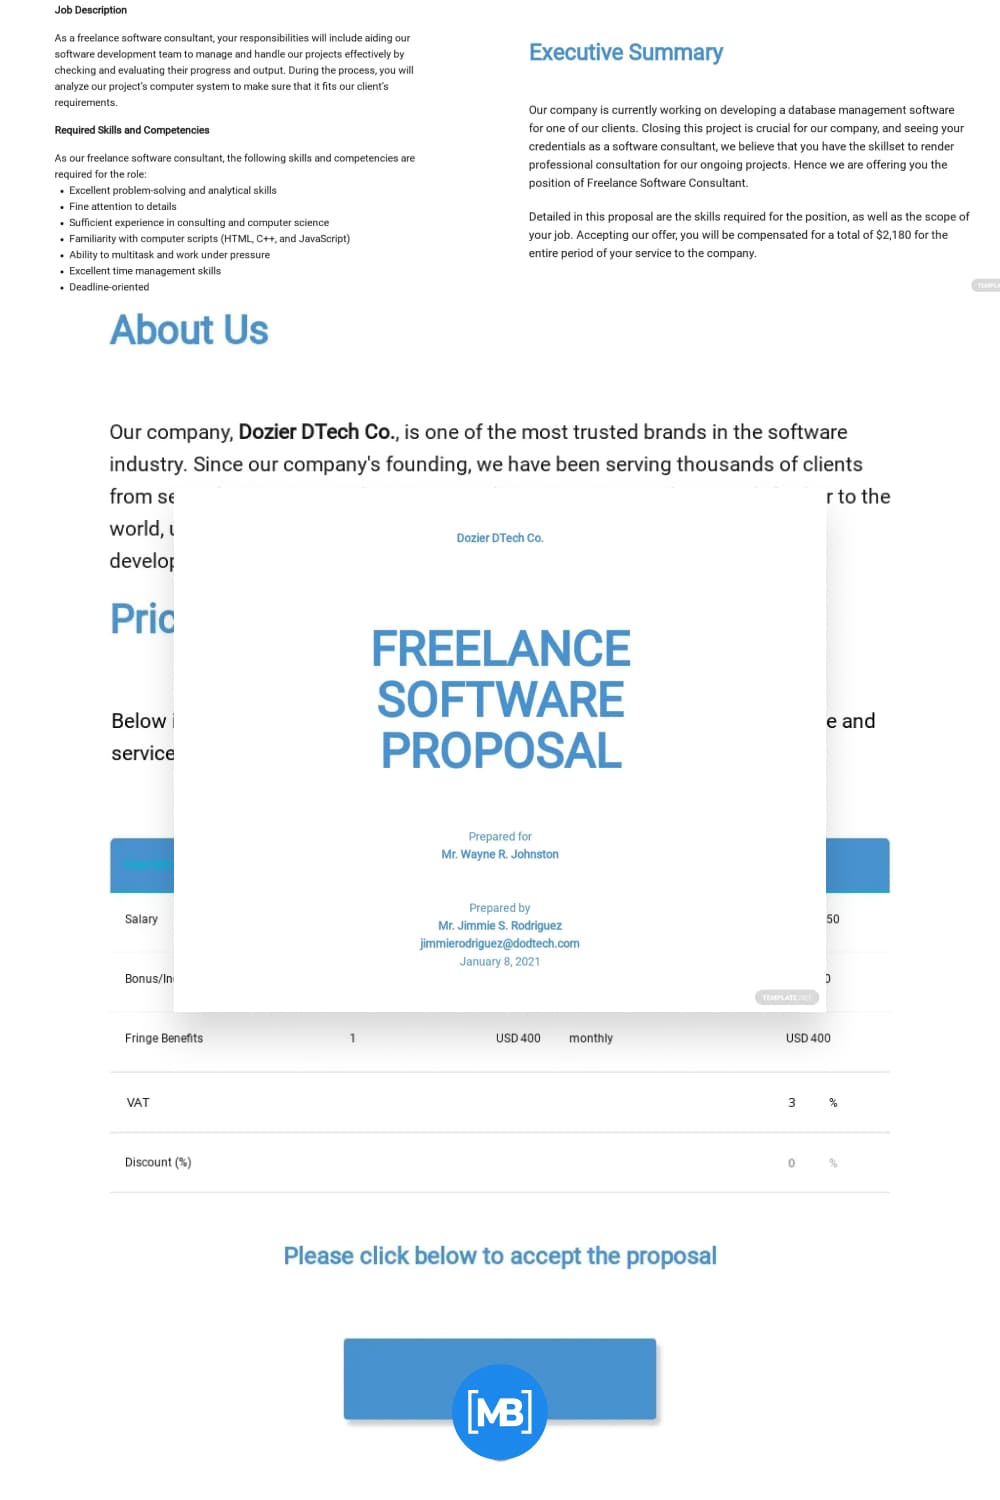 Freelance software proposal template.